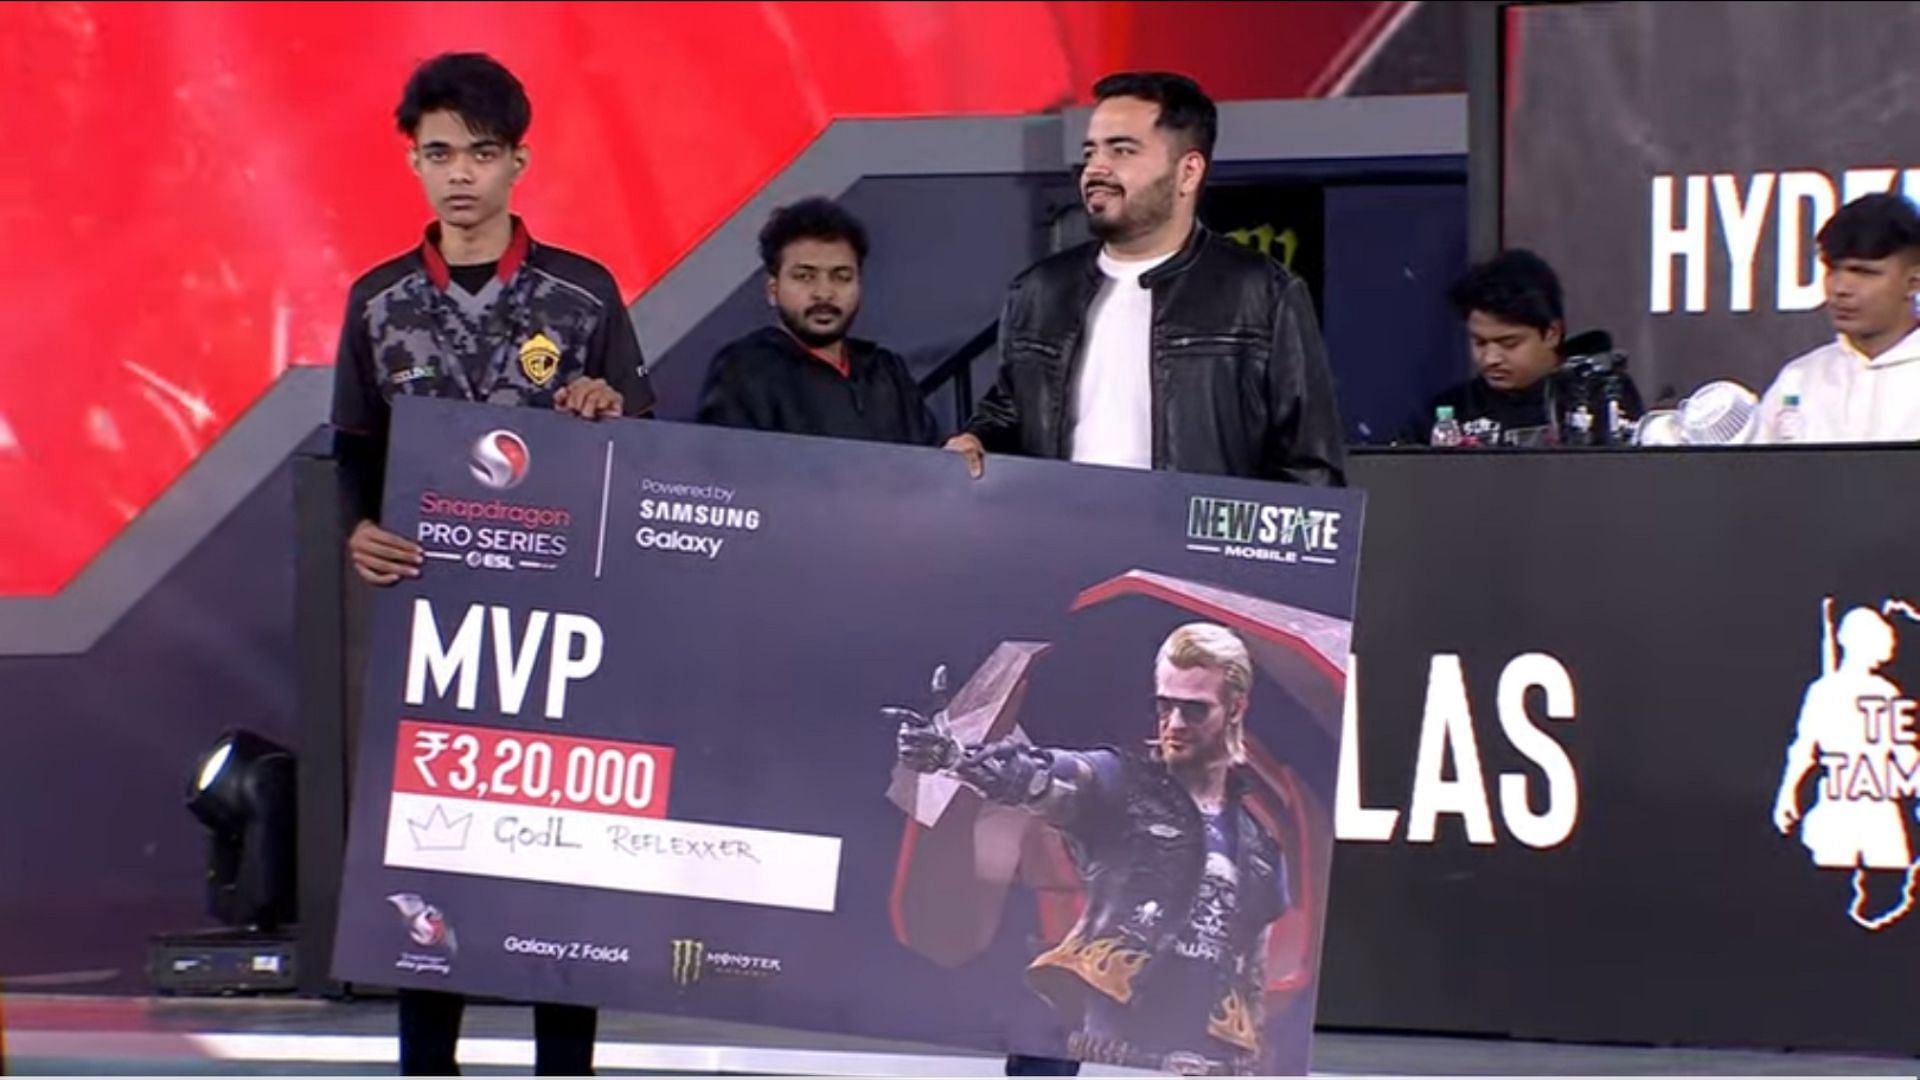 GodL Reflexer was given the Most Valuable Player Award at PUBG New State Pro Series (image via Nodwin Gaming)